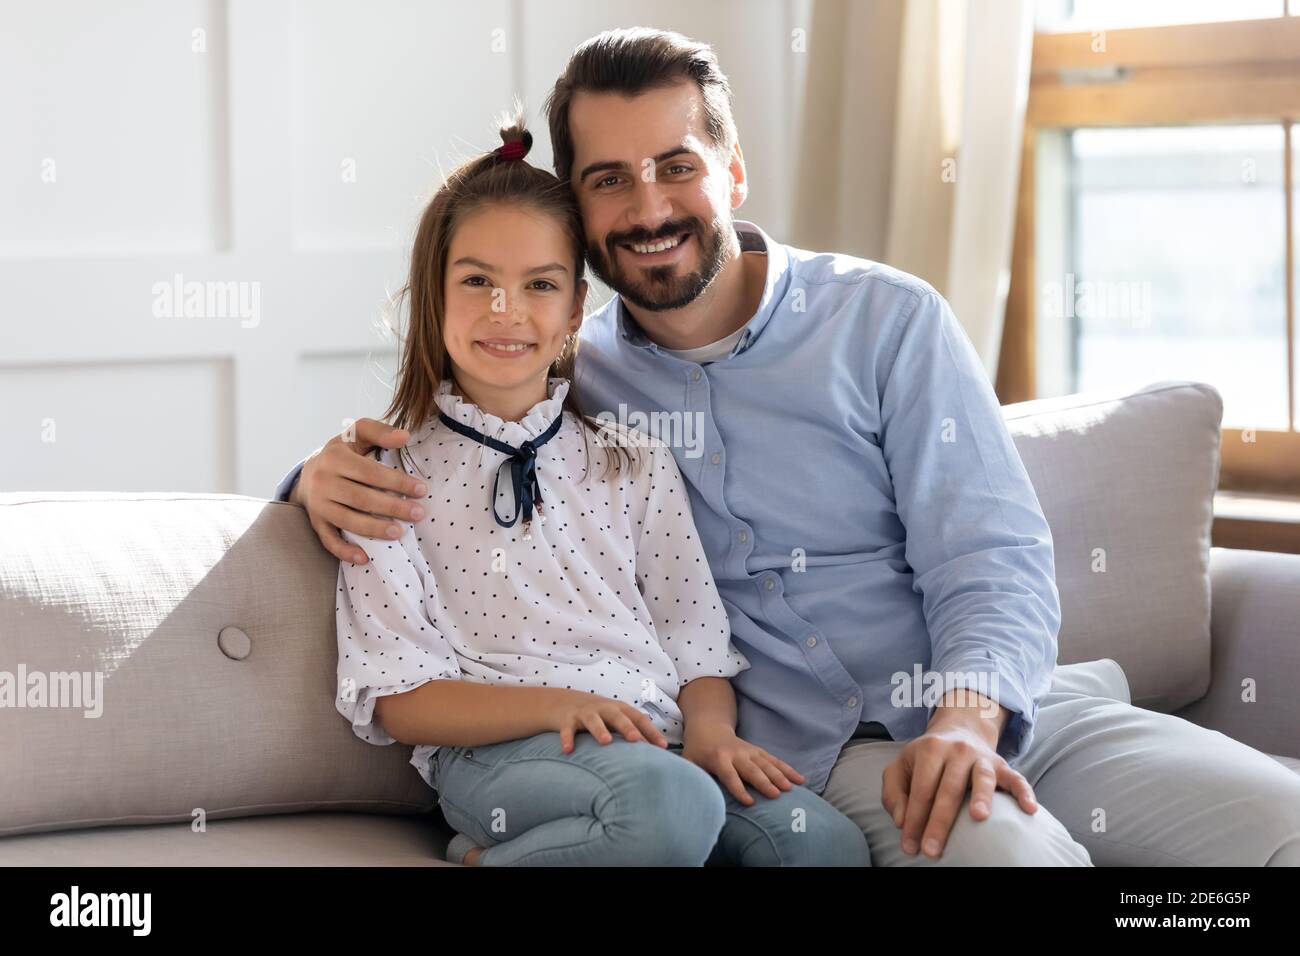 Portrait of loving dad and daughter relax at home Stock Photo